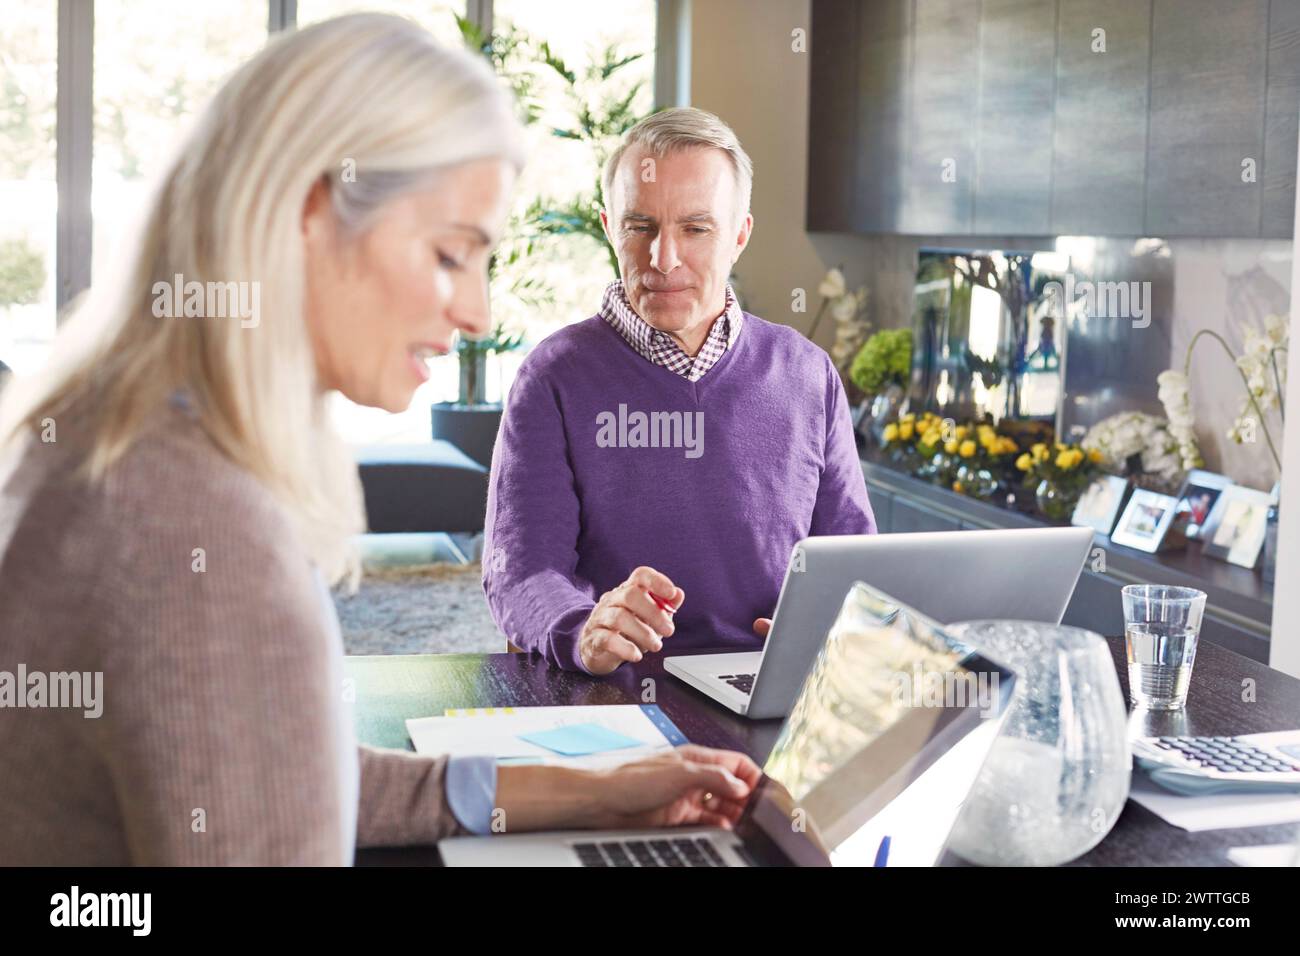 Mature adults working on laptops at a home interior Stock Photo